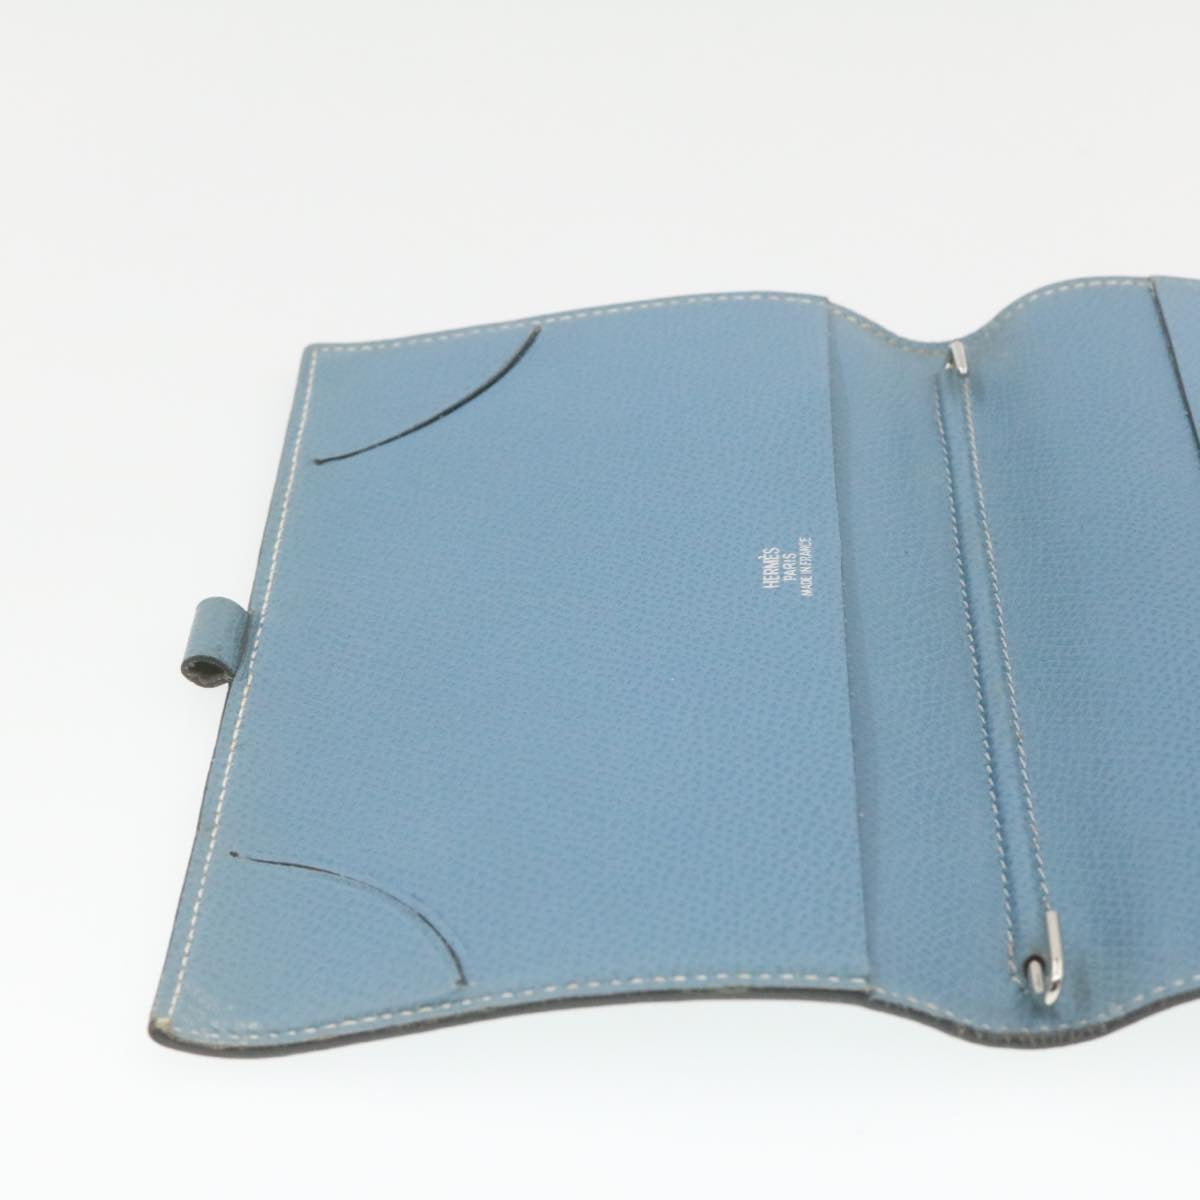 HERMES Agenda PM Day Planner Cover Leather Light Blue Auth ar3414